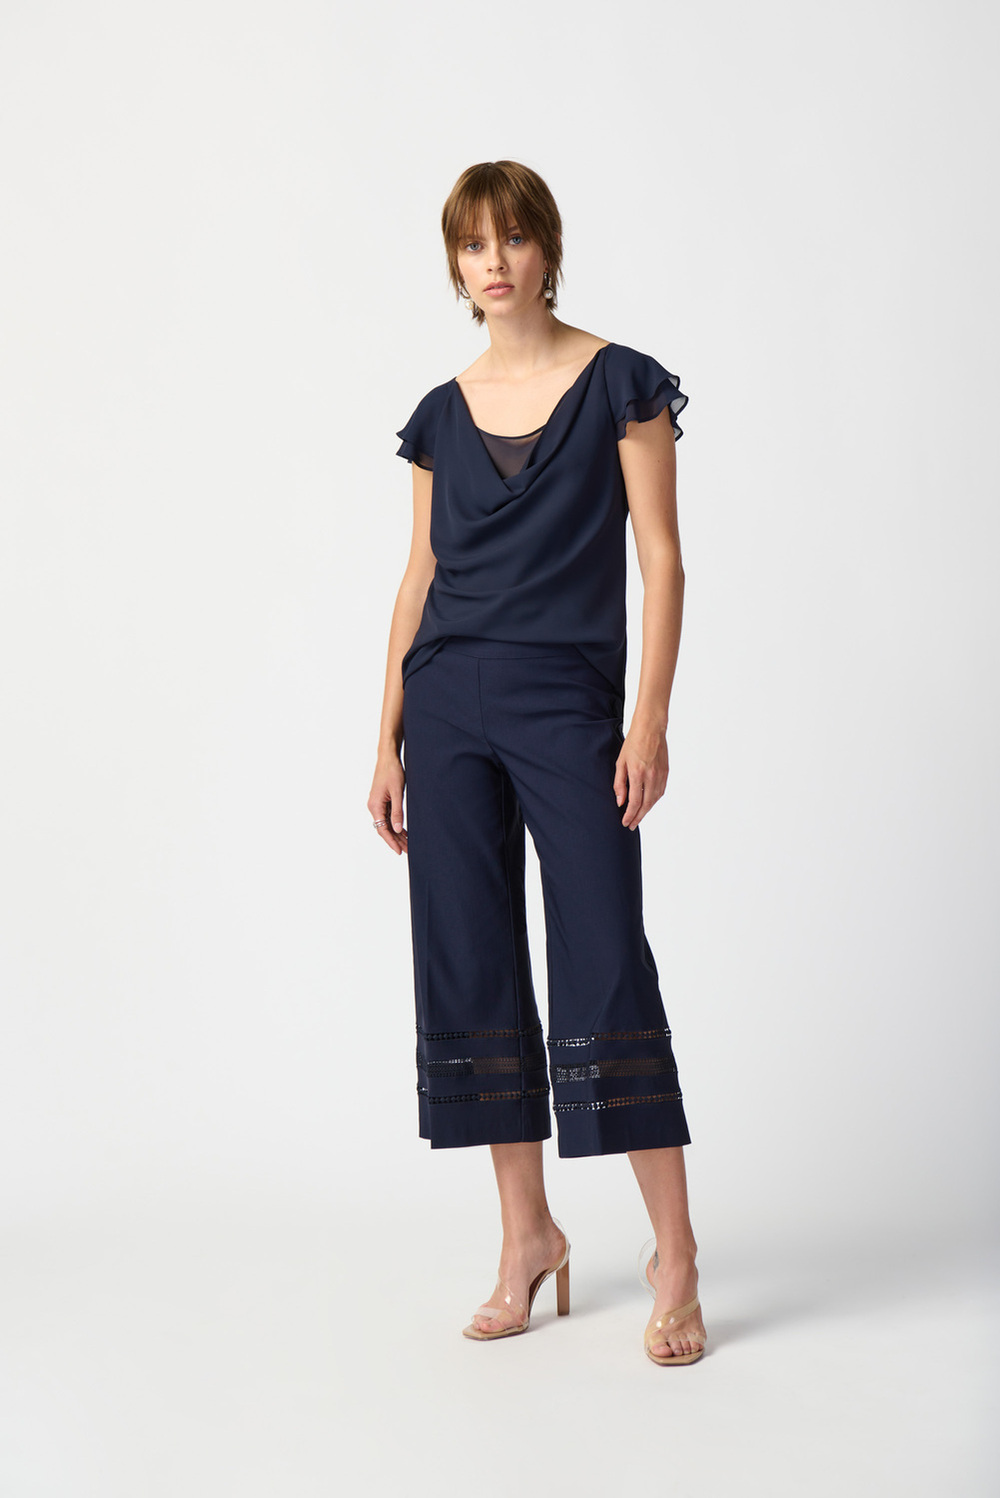 Wide Leg Patterned Capris Style 241073. Midnight Blue